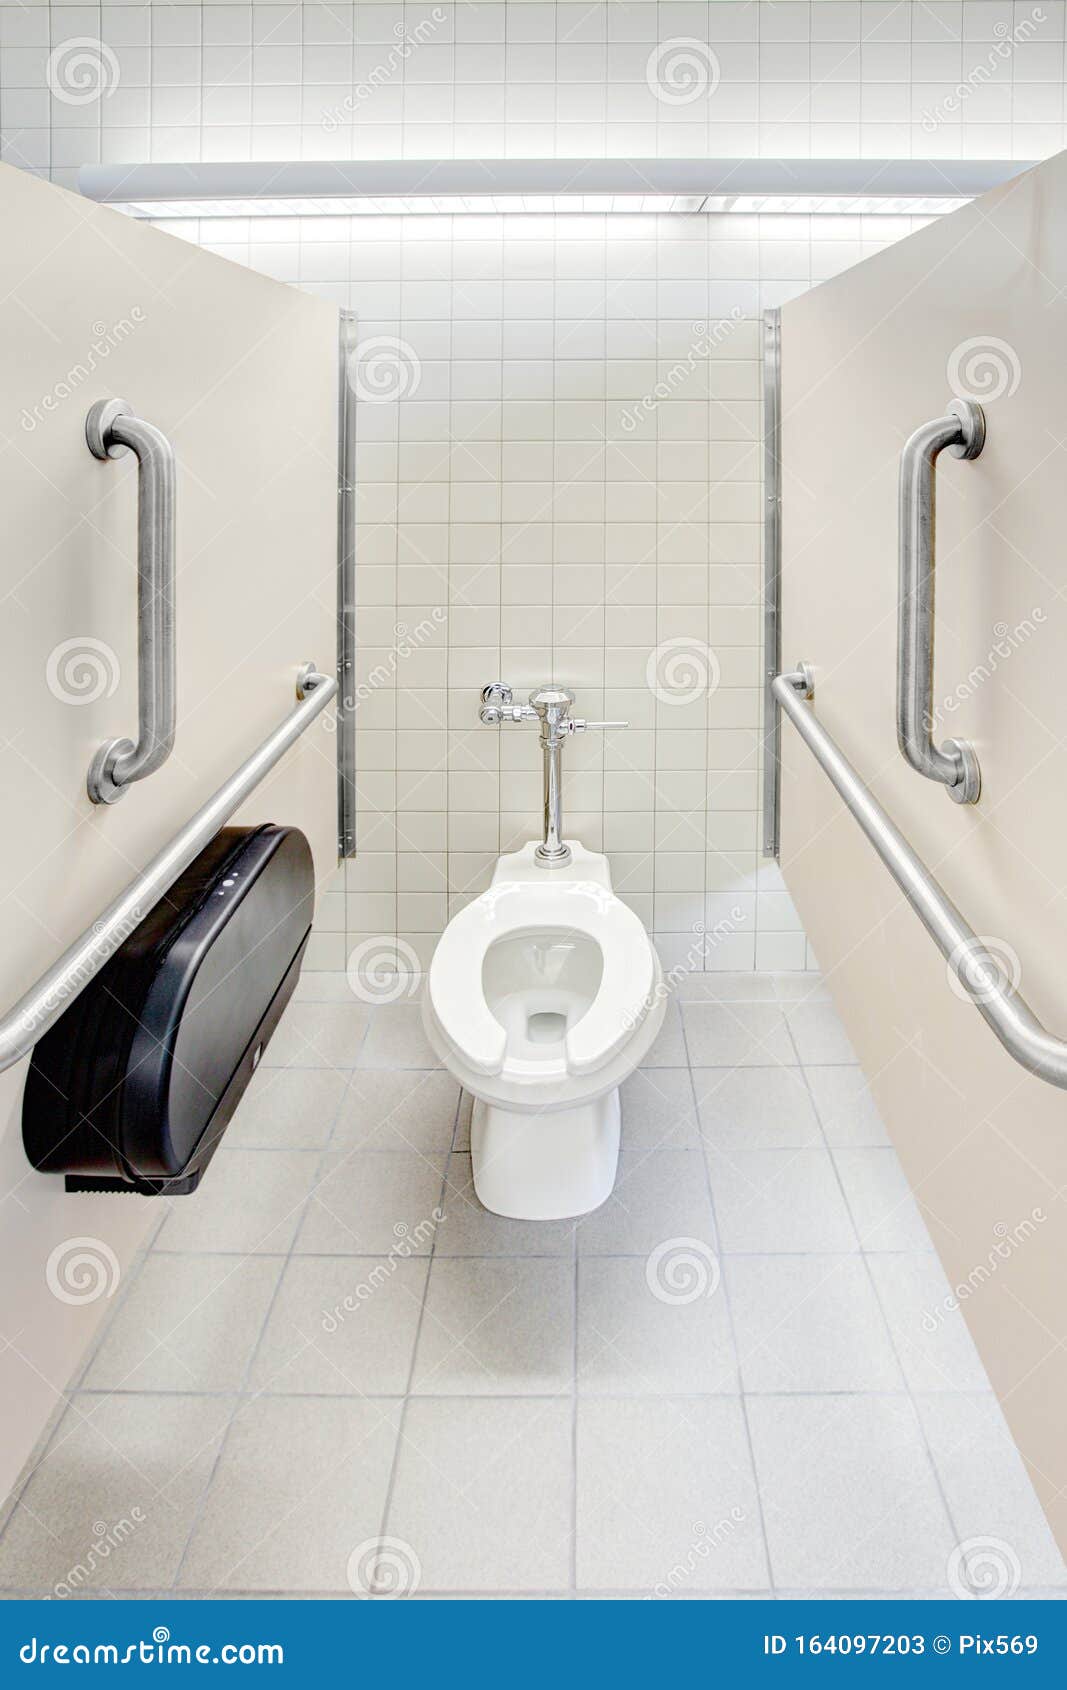 How Big Does A Handicap Bathroom Stall Have To Be - BEST HOME DESIGN IDEAS